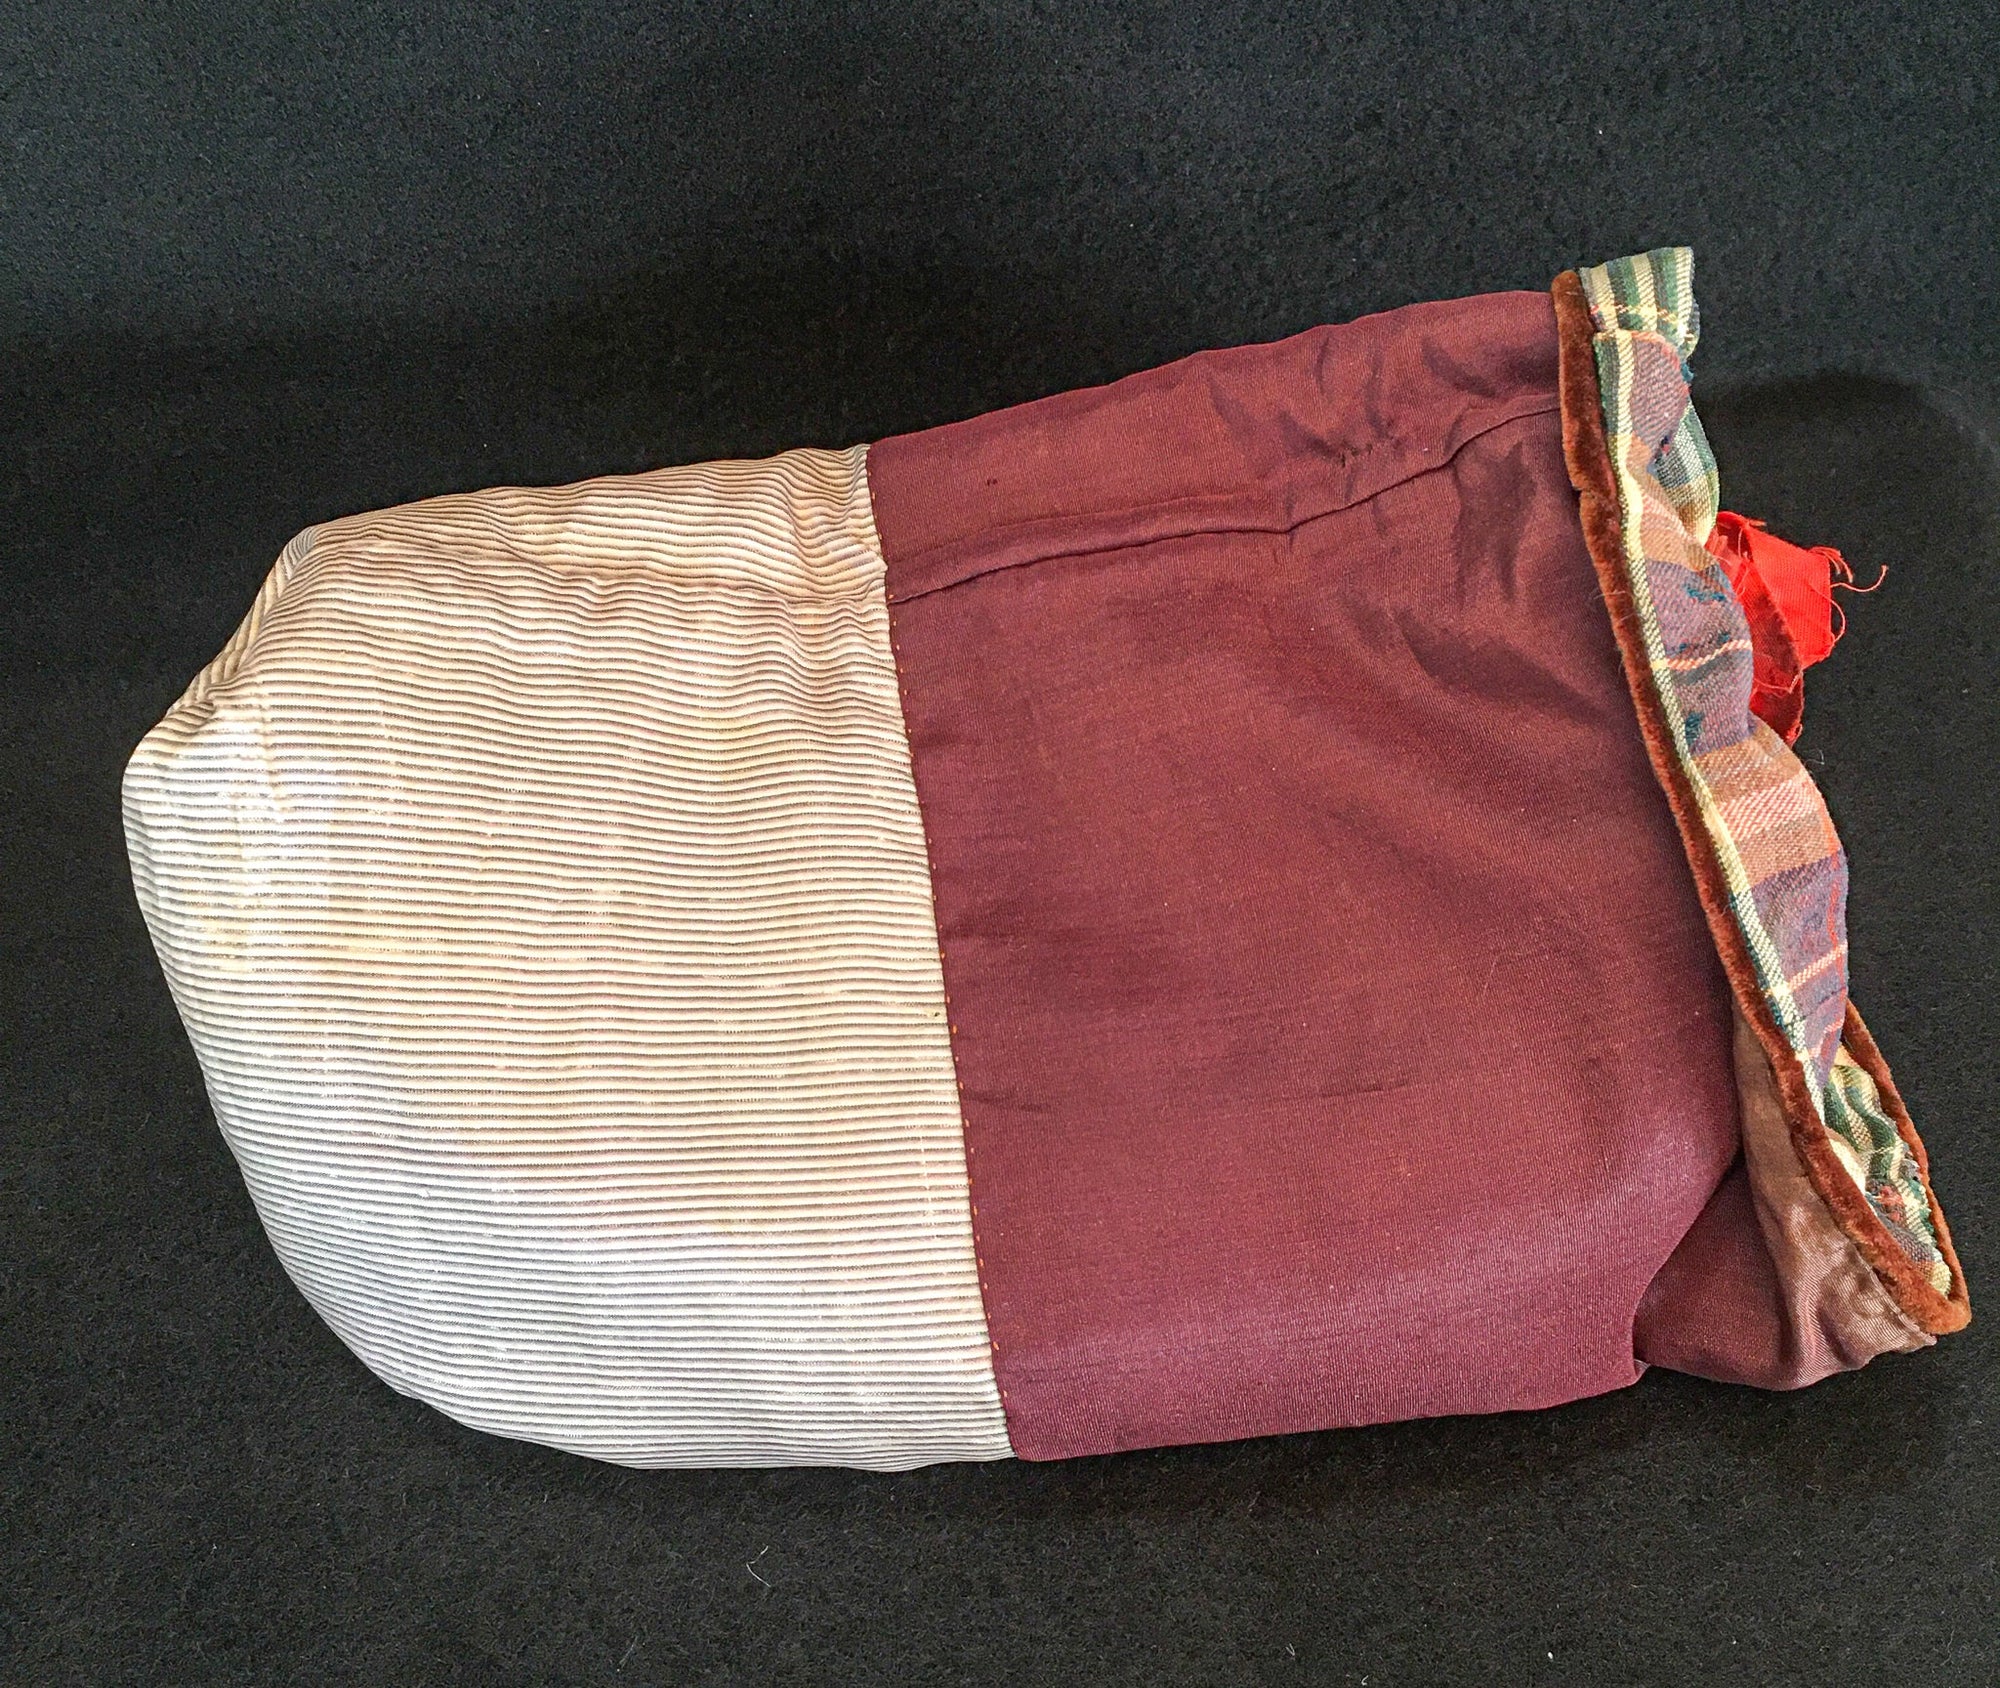 Vintage Homemade Sewing Bag with Contents!